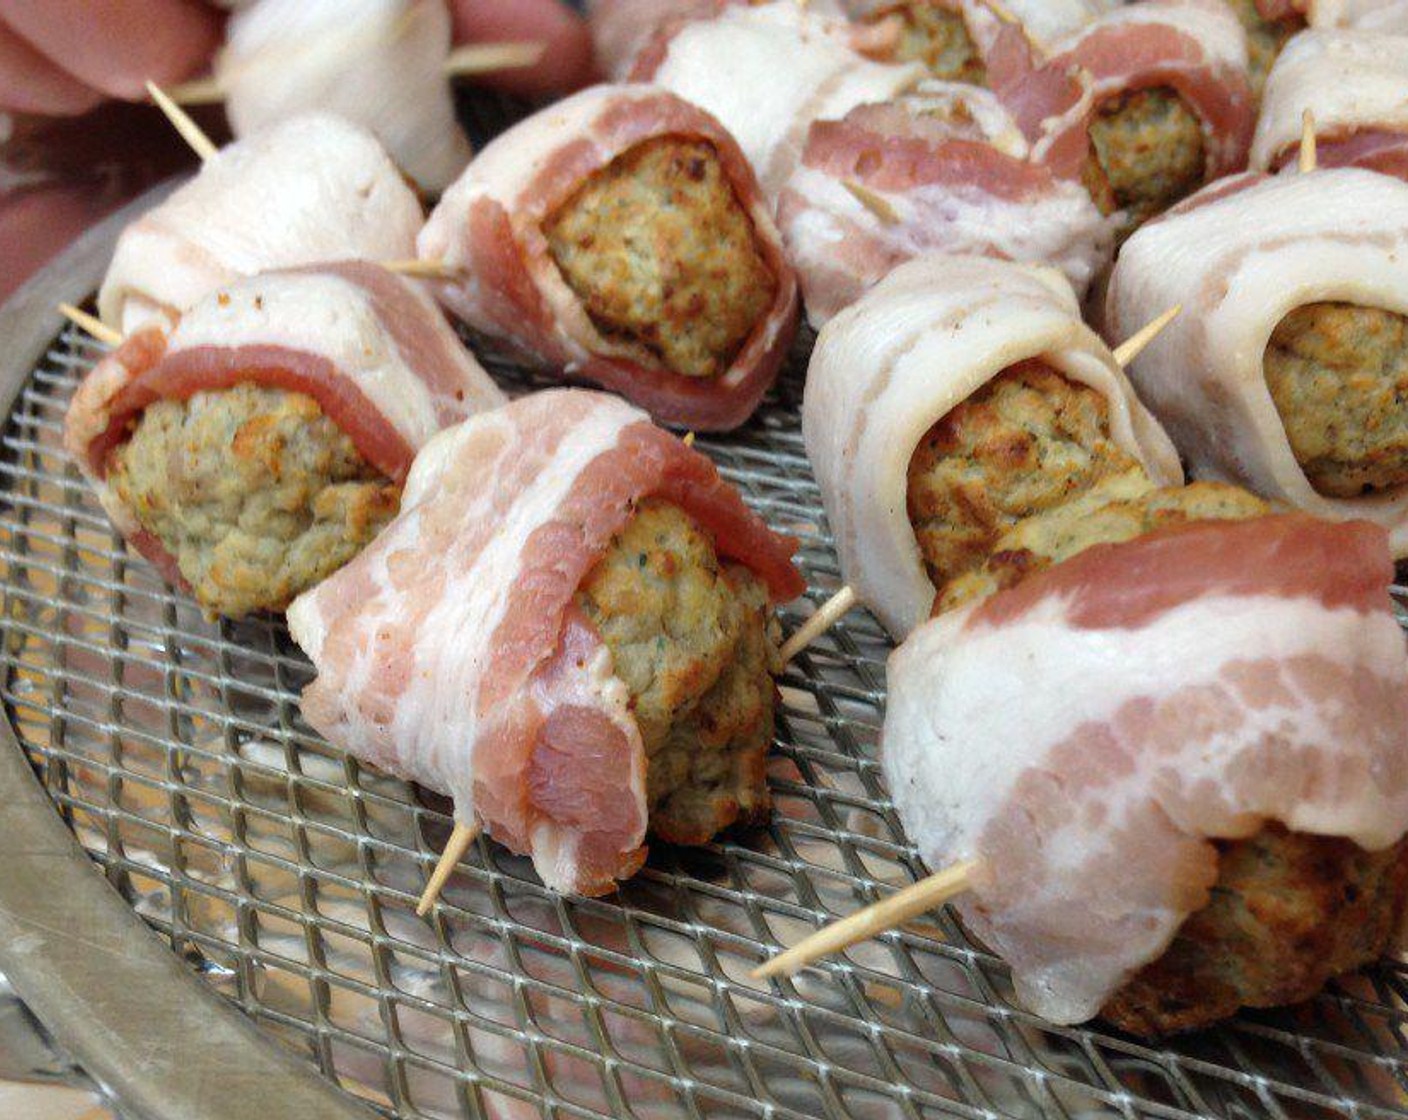 step 1 Take your Bacon (12 slices) and cut the slices in half. To assemble your moink balls, wrap the bacon around the Meatballs (4 1/2 cups) and use a toothpick to hold the bacon in place.